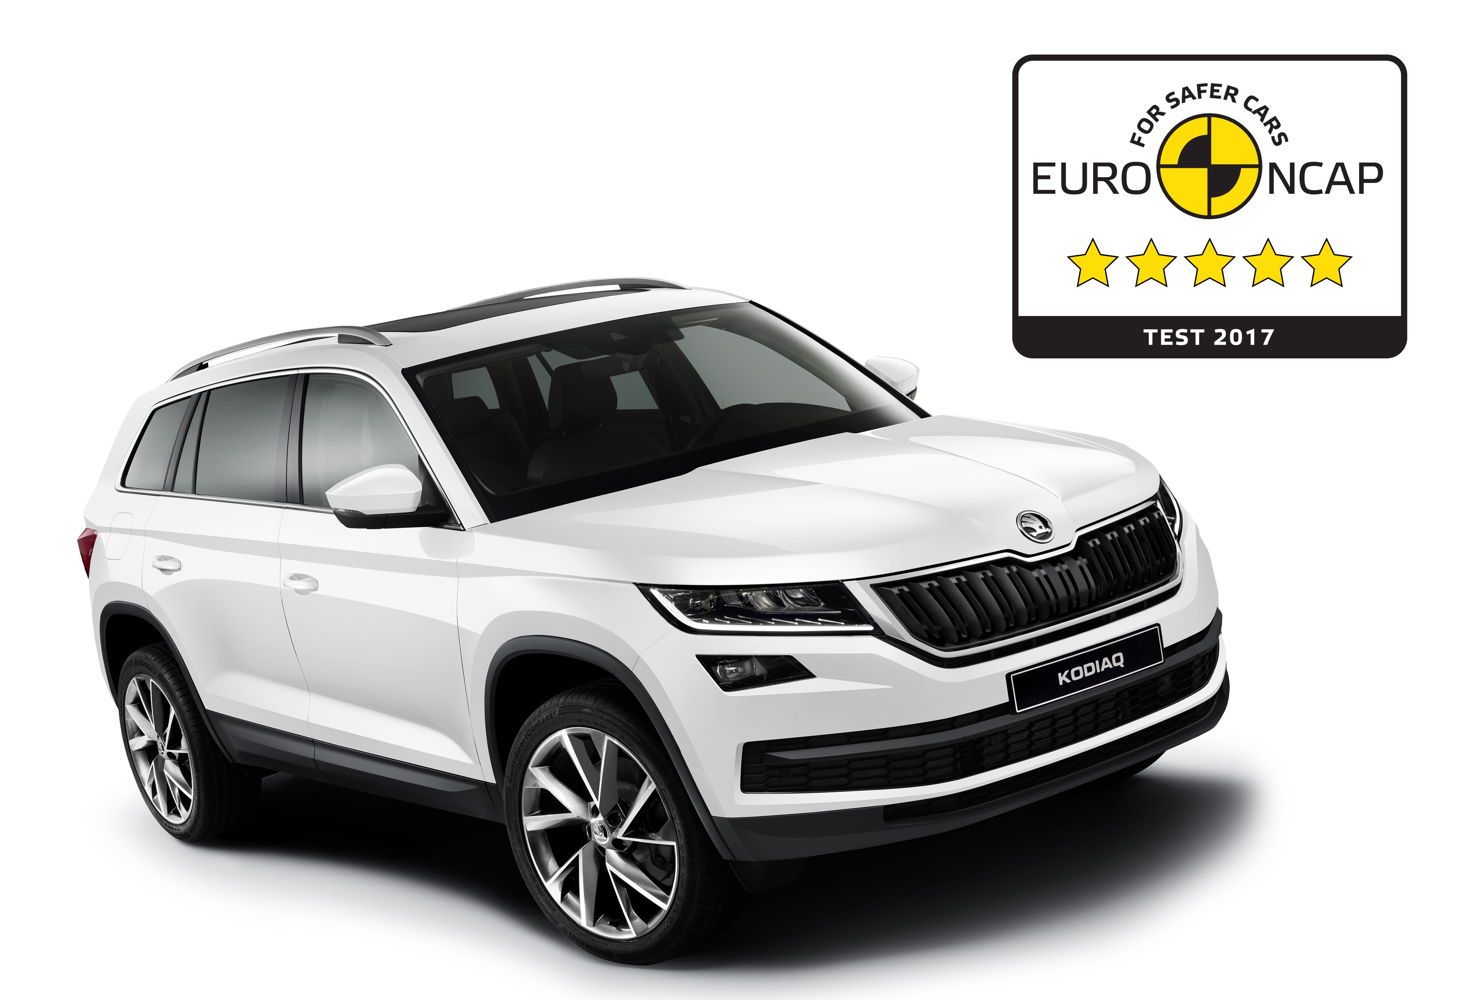 Euro NCAP awarded an excellent rating of 92 percent for adult occupant protection. In the side-on collision test, the ŠKODA KODIAQ even achieved full marks for good protection of all vulnerable areas of the body.